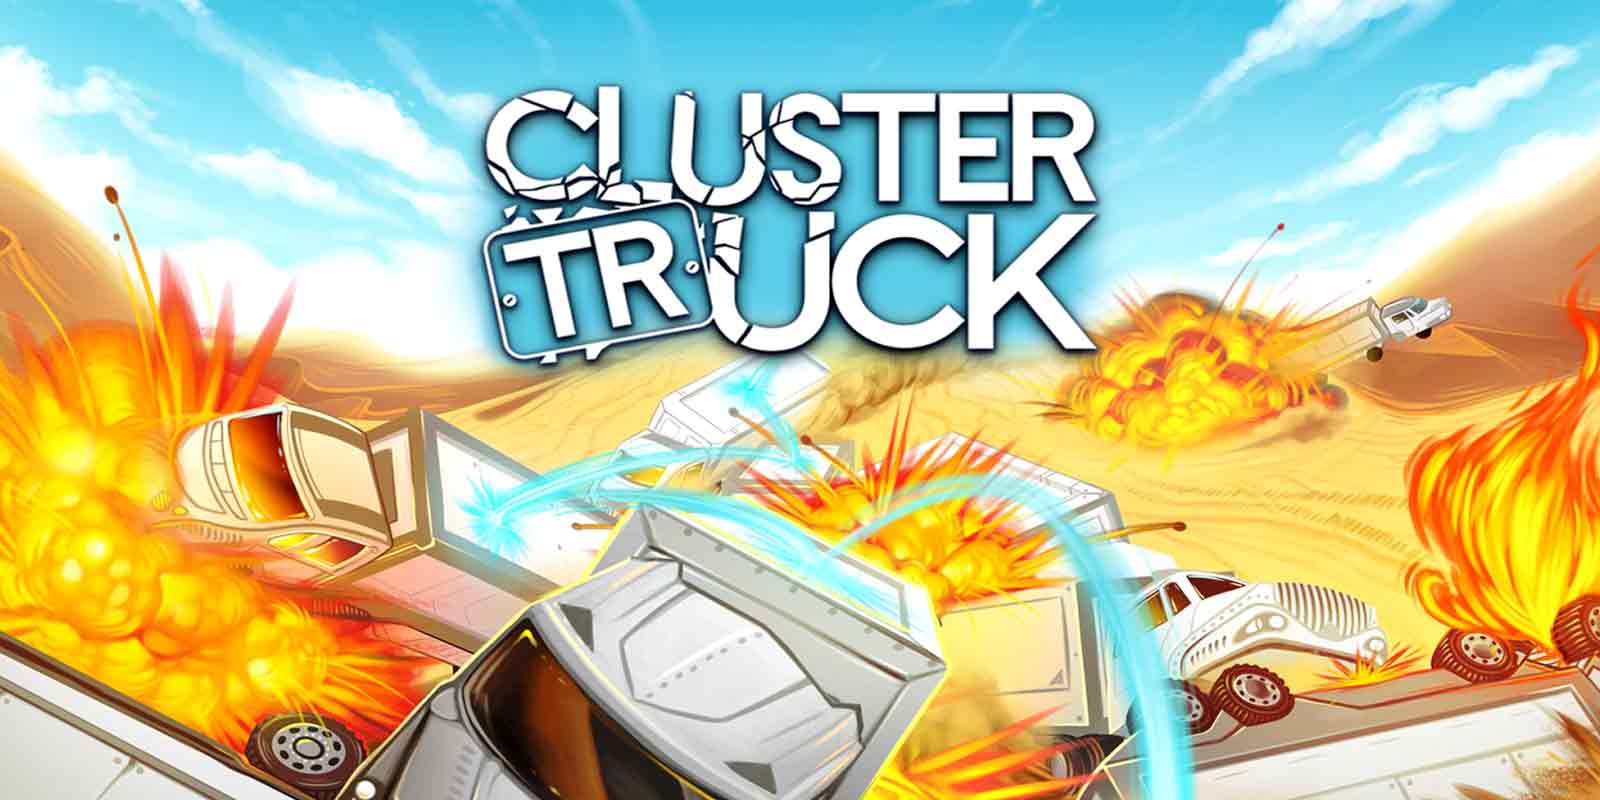 Clustertruck PS4 Version Full Game Free Download